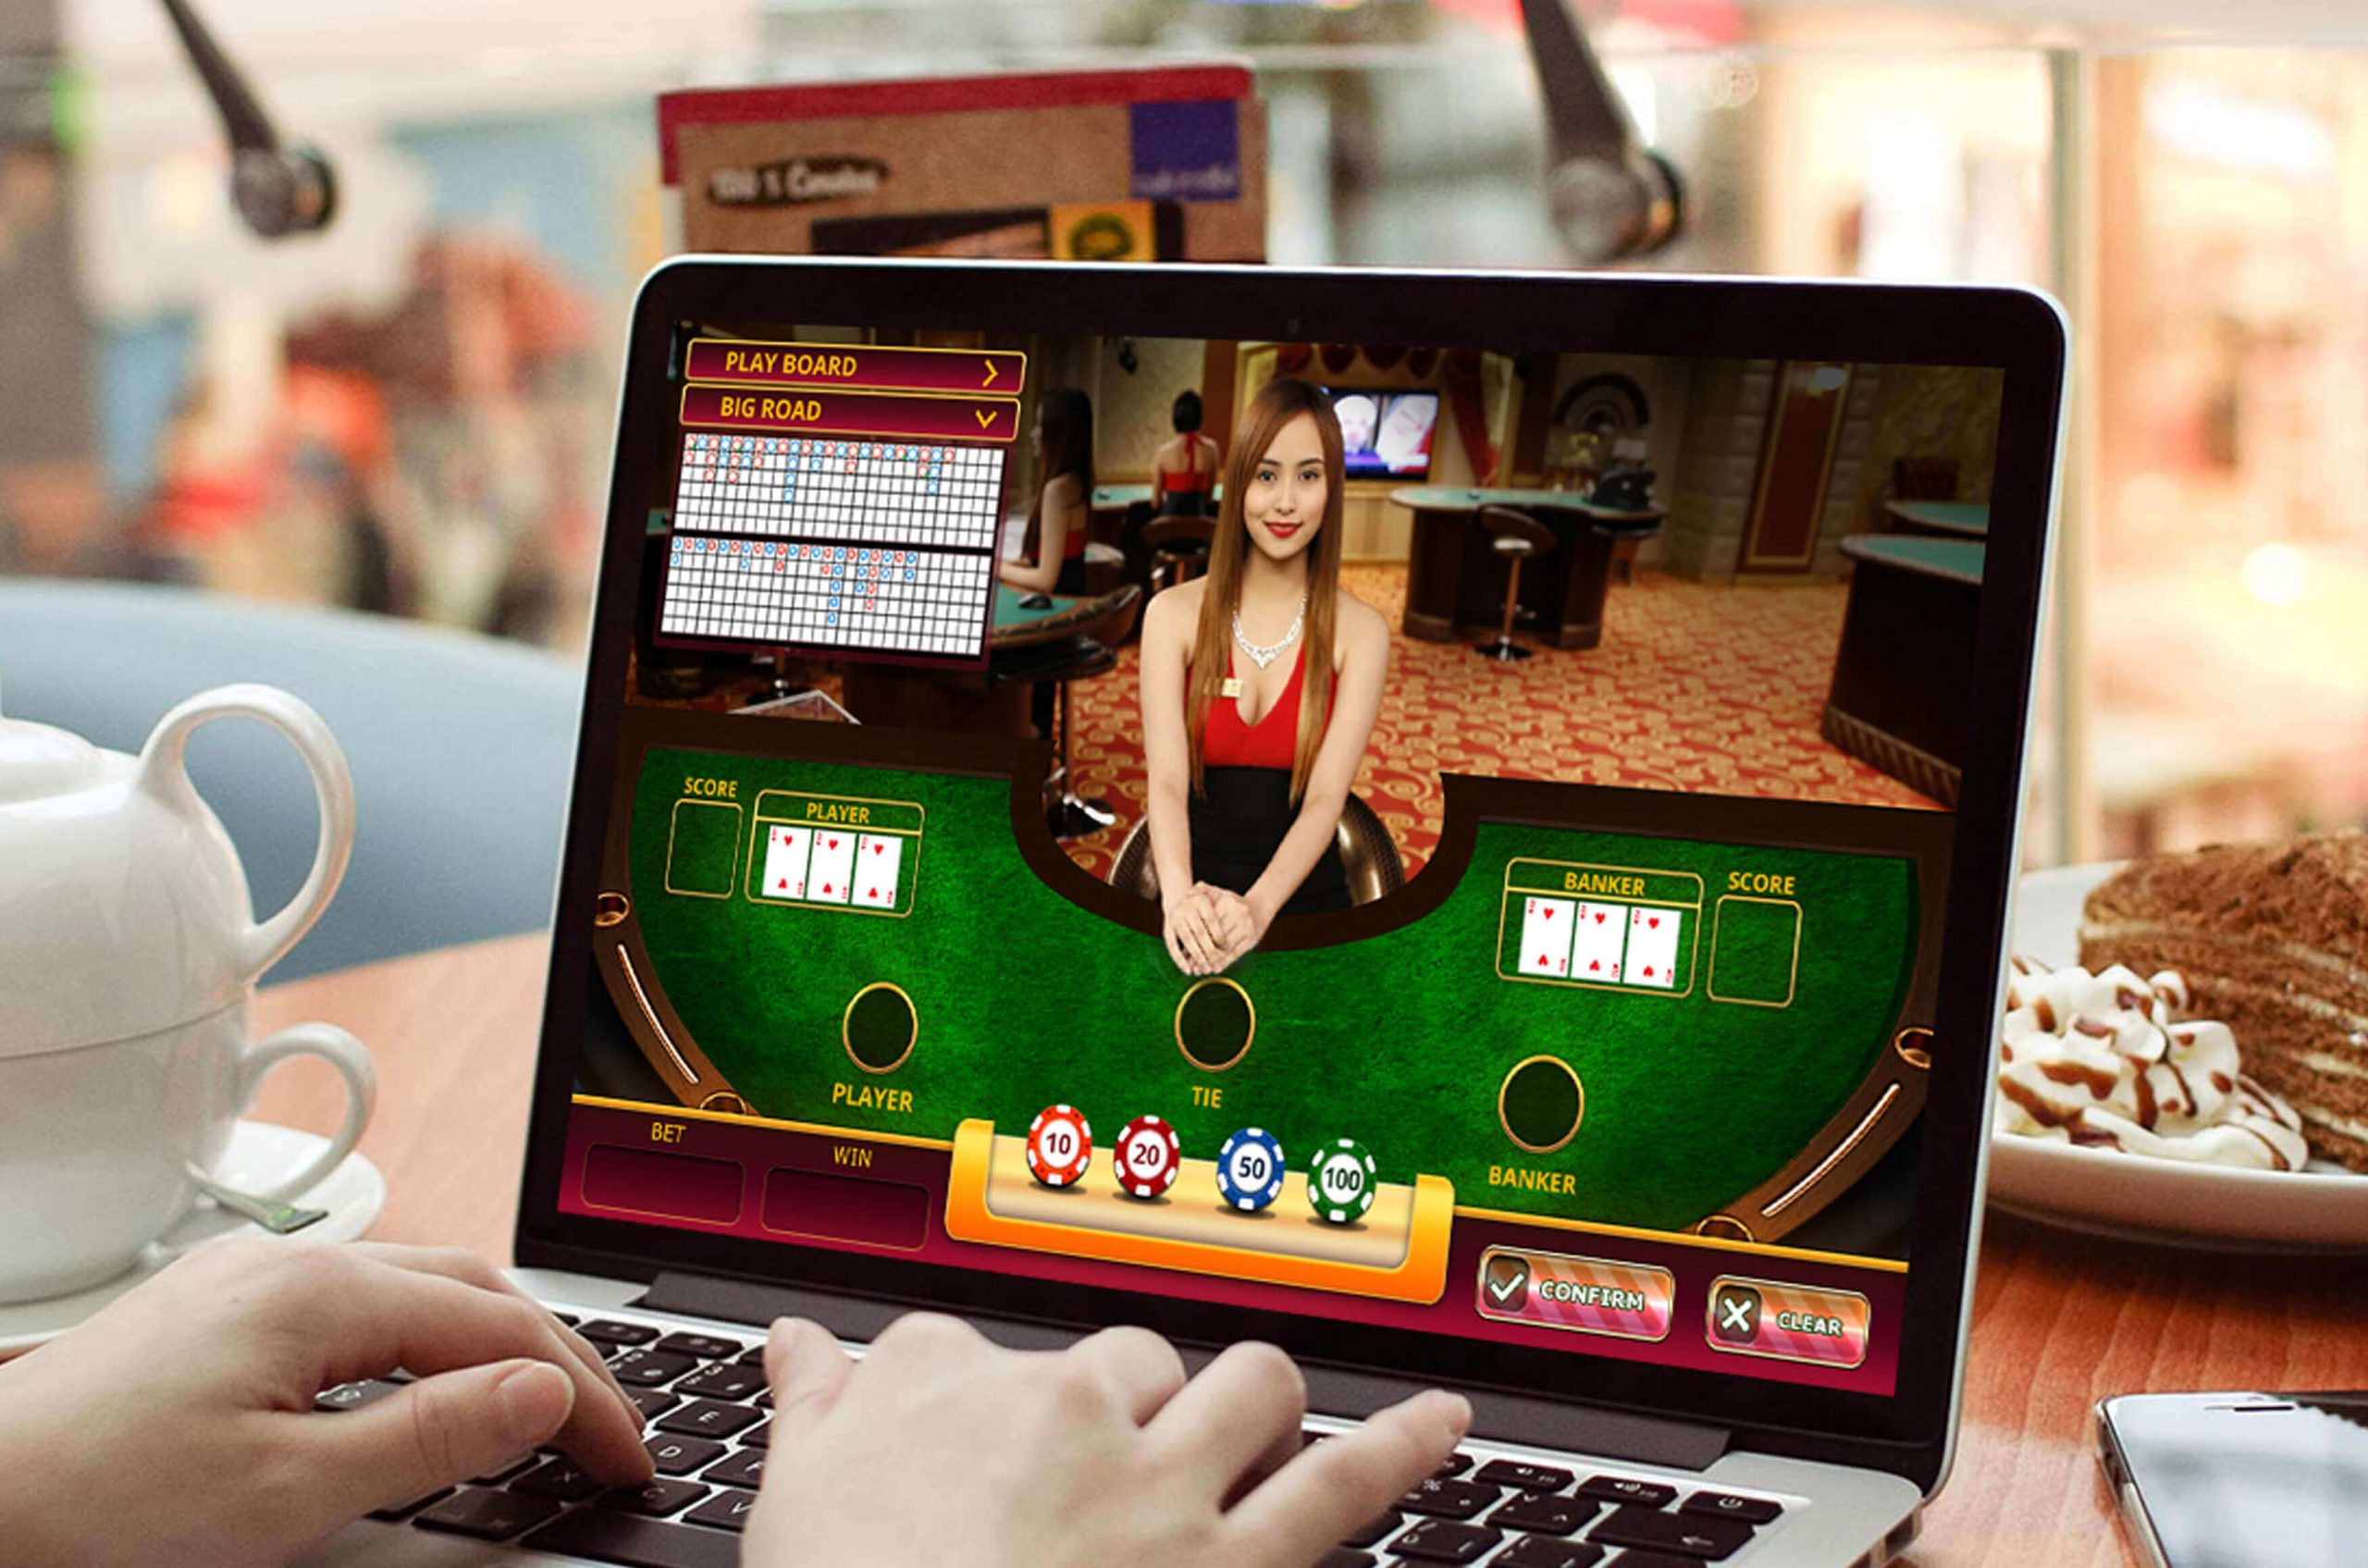 Some Common Ways To Increase The Winning Chances On Online Casinos